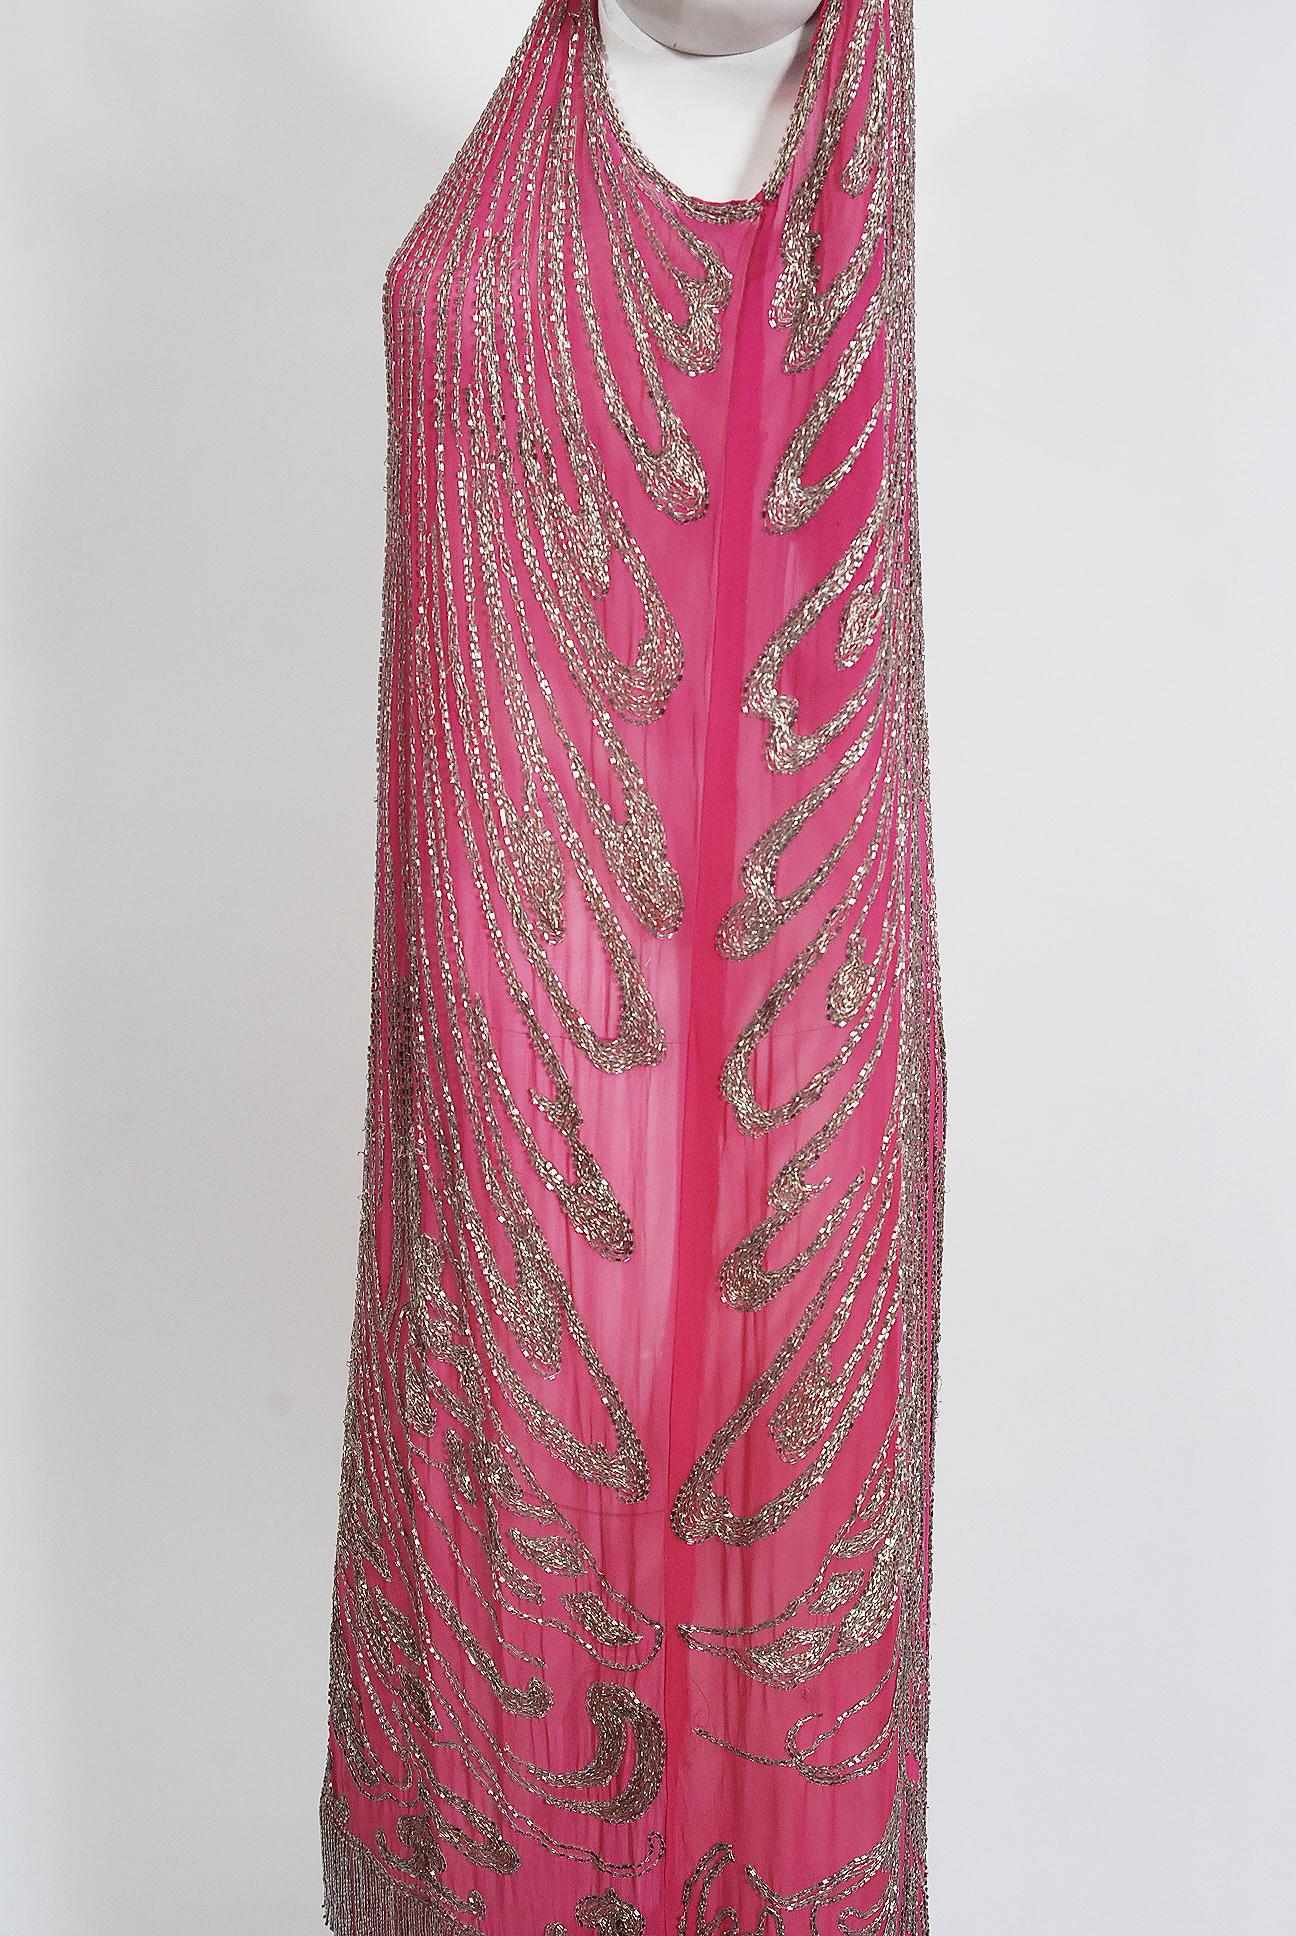 Vintage 1920's French Couture Fuchsia Pink Beaded Embroidered Silk Flapper Dress 1